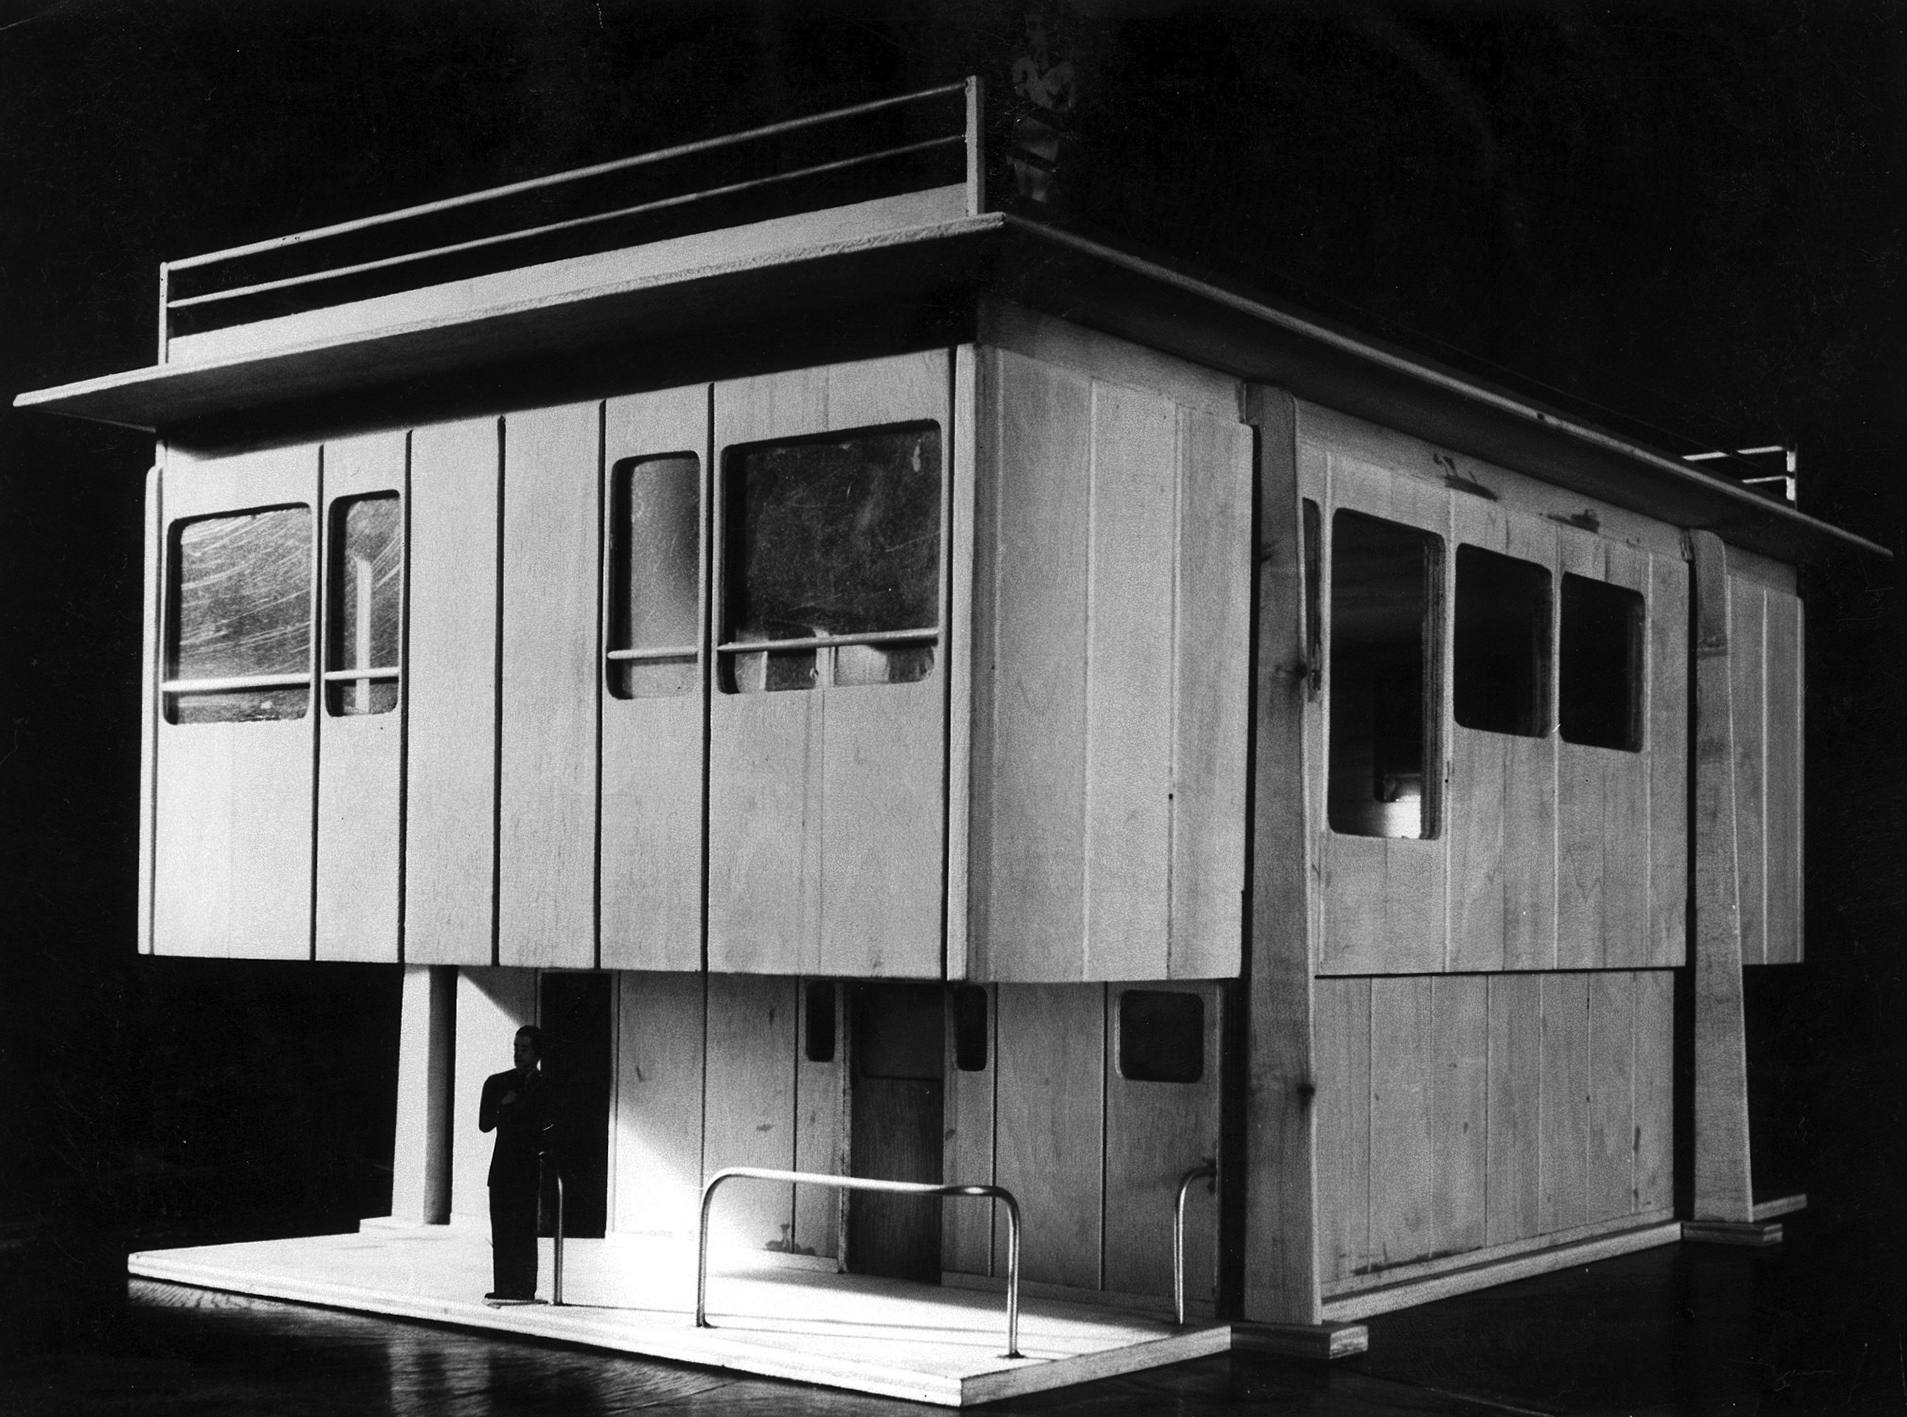 Design for a prefabricated metal house (architects E. Beaudouin and M. Lods), 1938-1944.